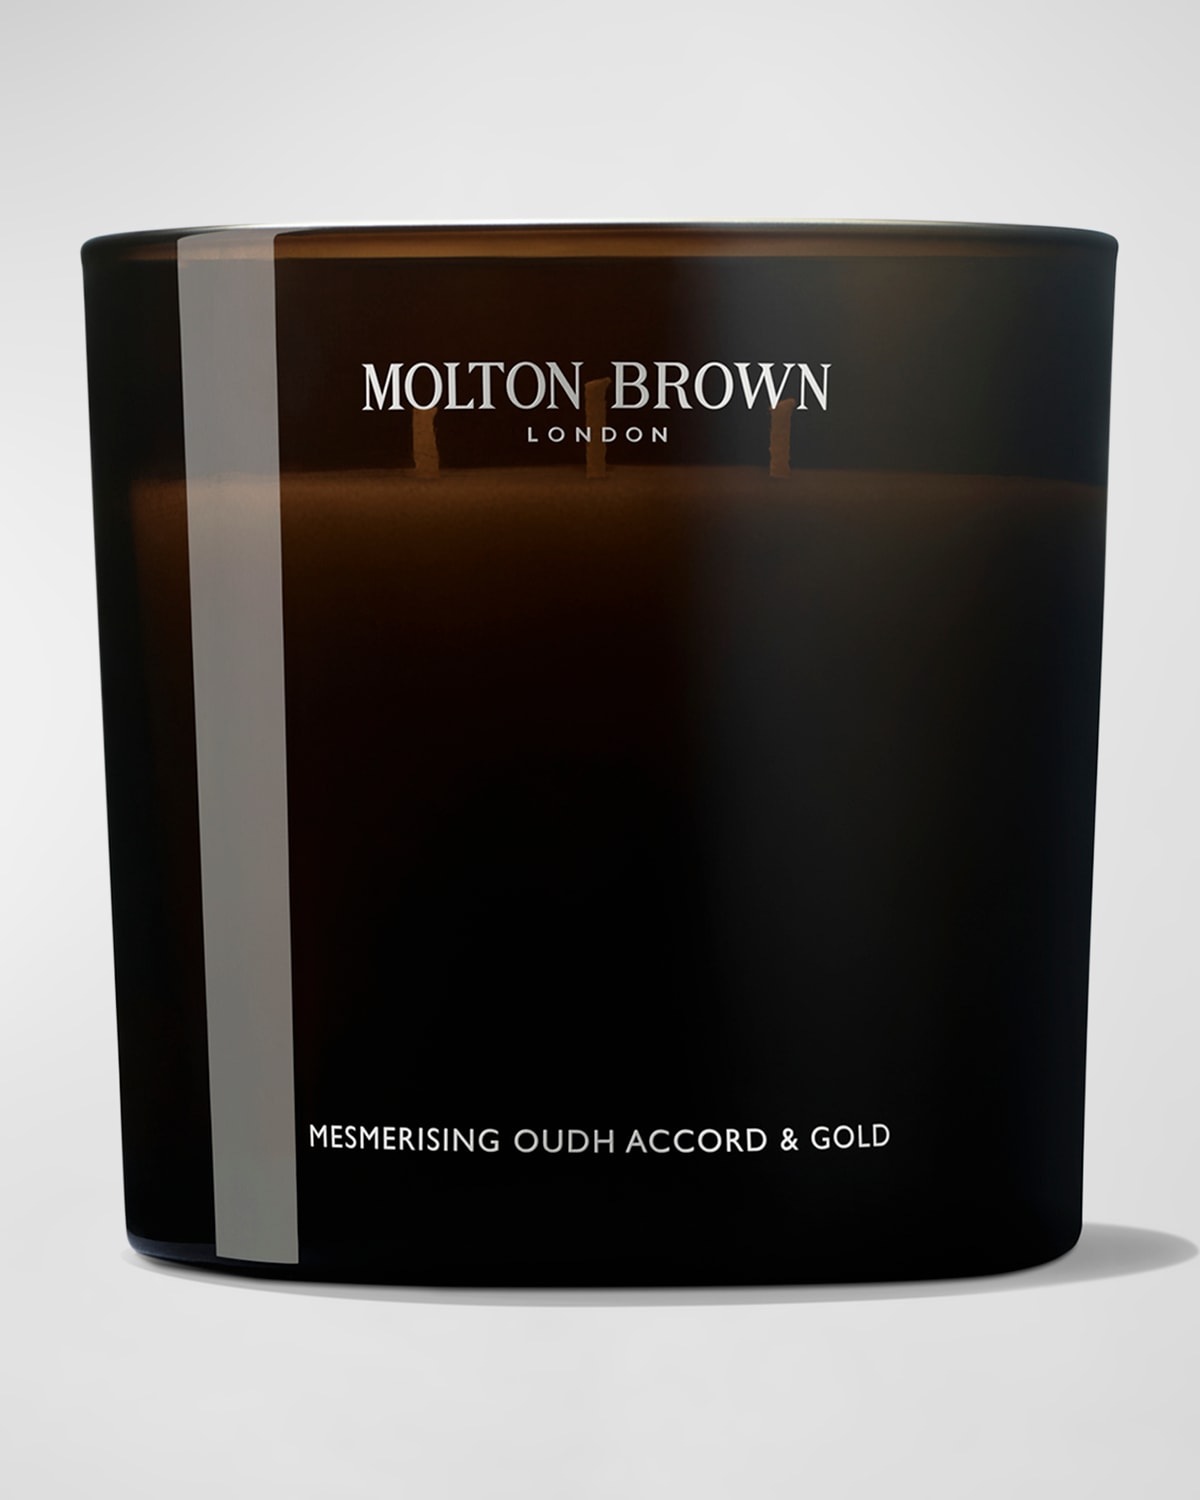 Mesmerising Oudh Accord and Gold Luxury Scented 3-Wick Candle, 21.16 oz.